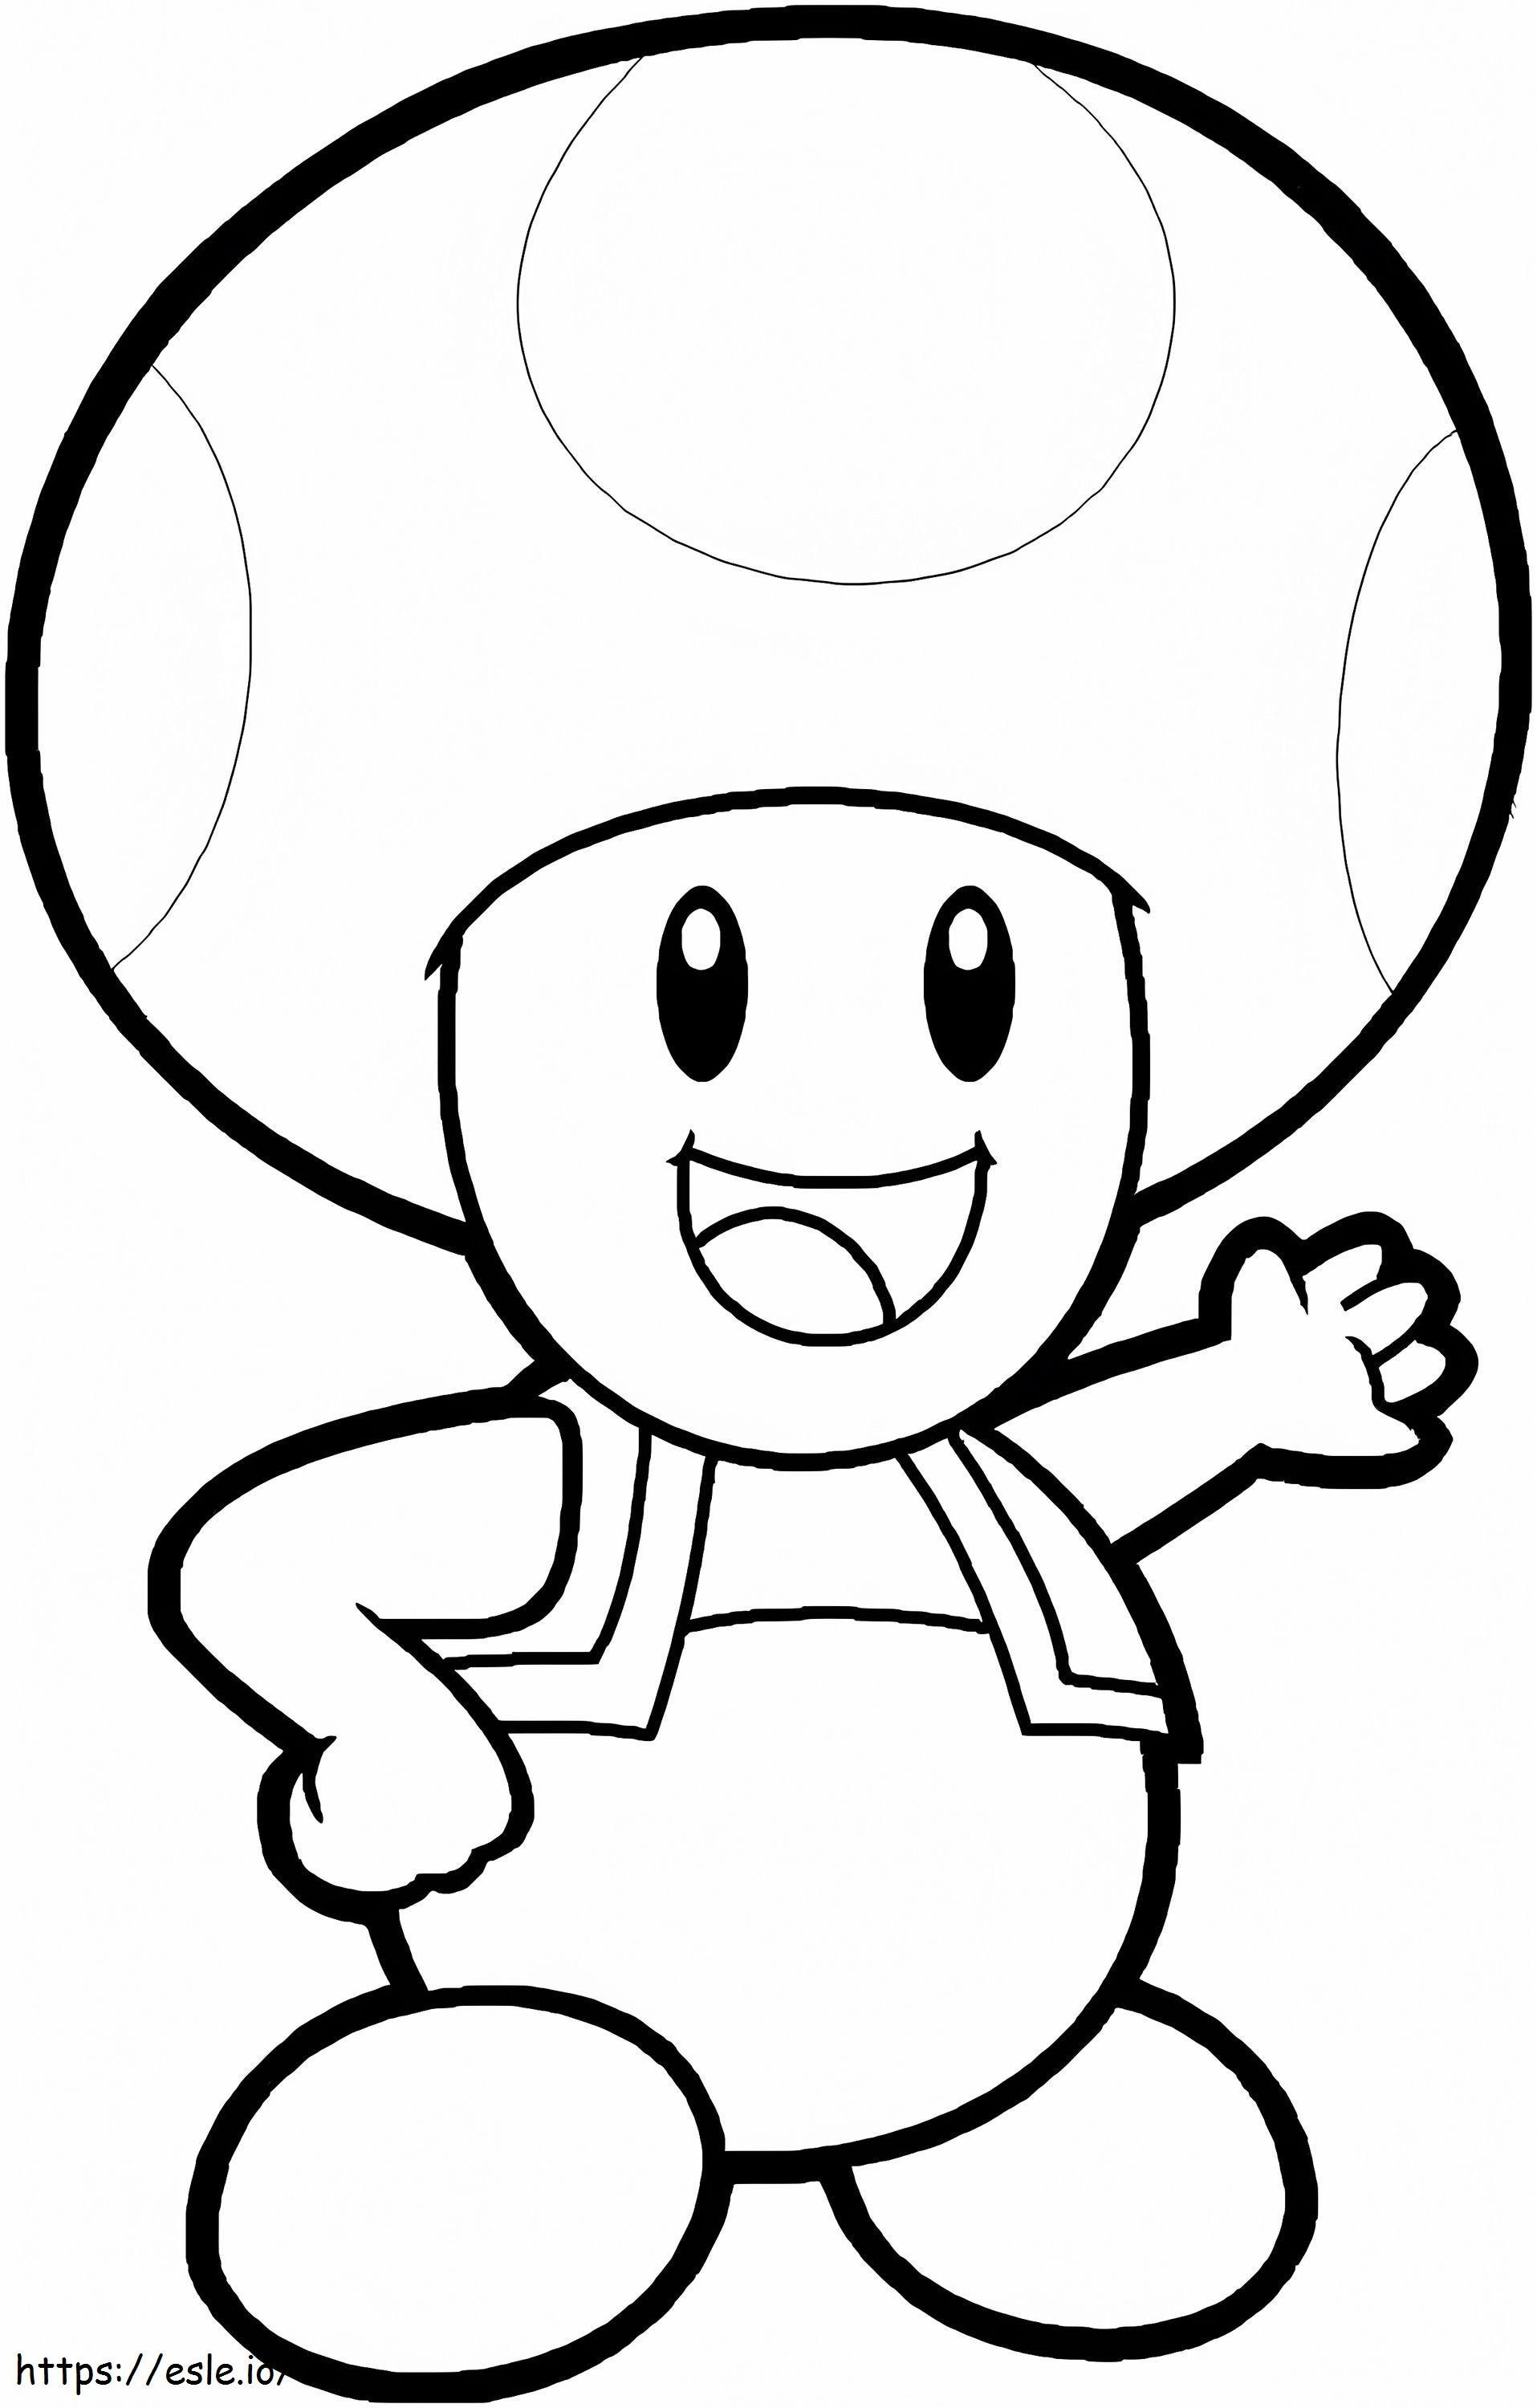 Toad From Mario Bros. coloring page